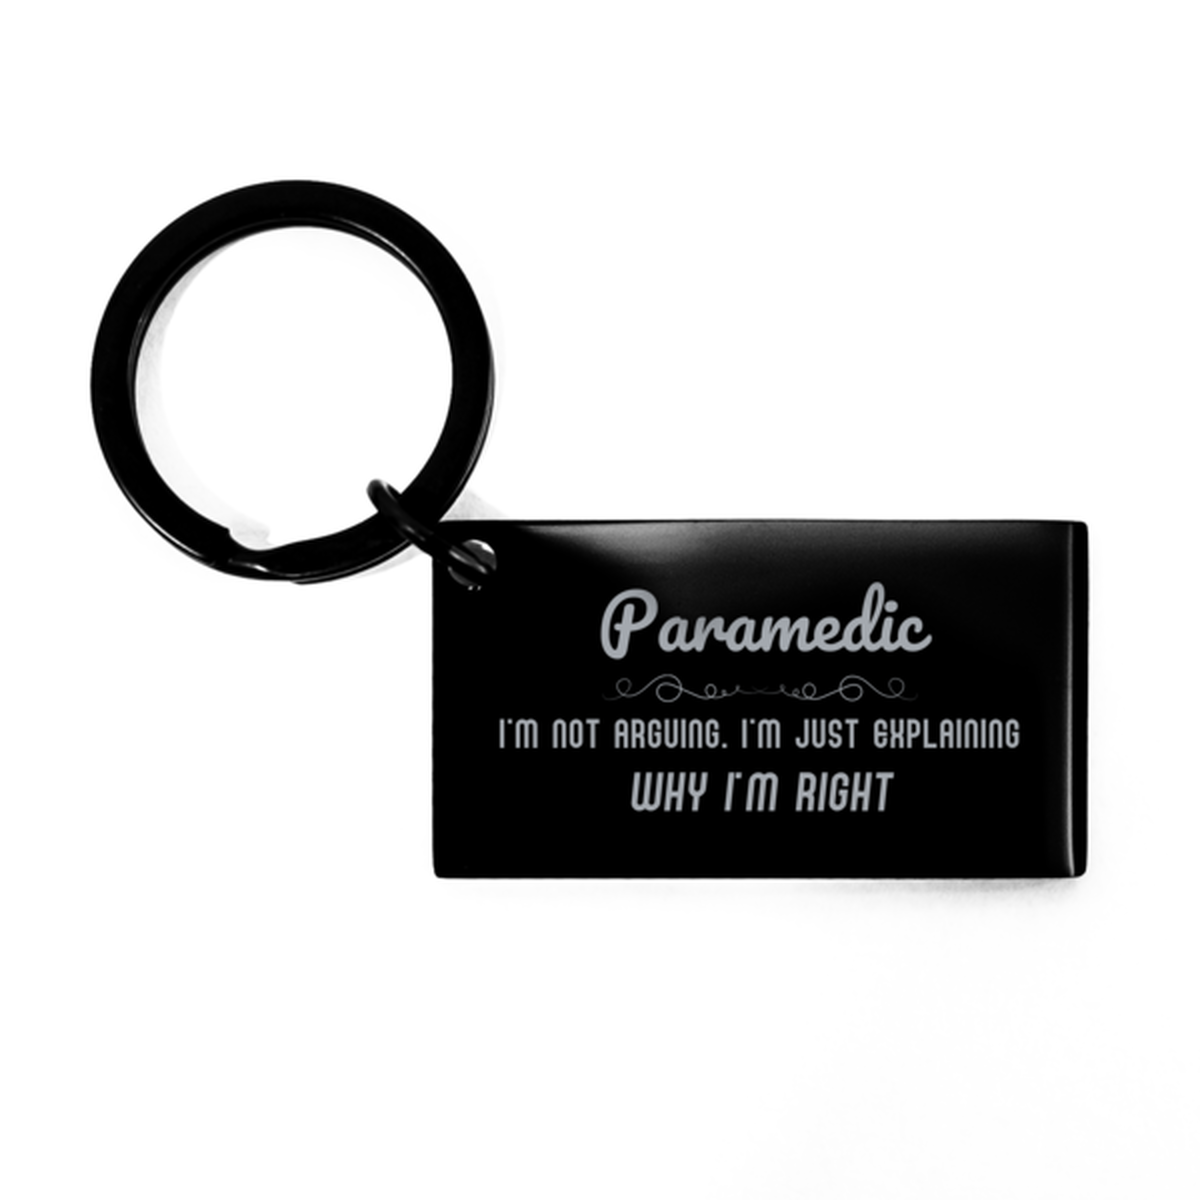 Paramedic I'm not Arguing. I'm Just Explaining Why I'm RIGHT Keychain, Funny Saying Quote Paramedic Gifts For Paramedic Graduation Birthday Christmas Gifts for Men Women Coworker